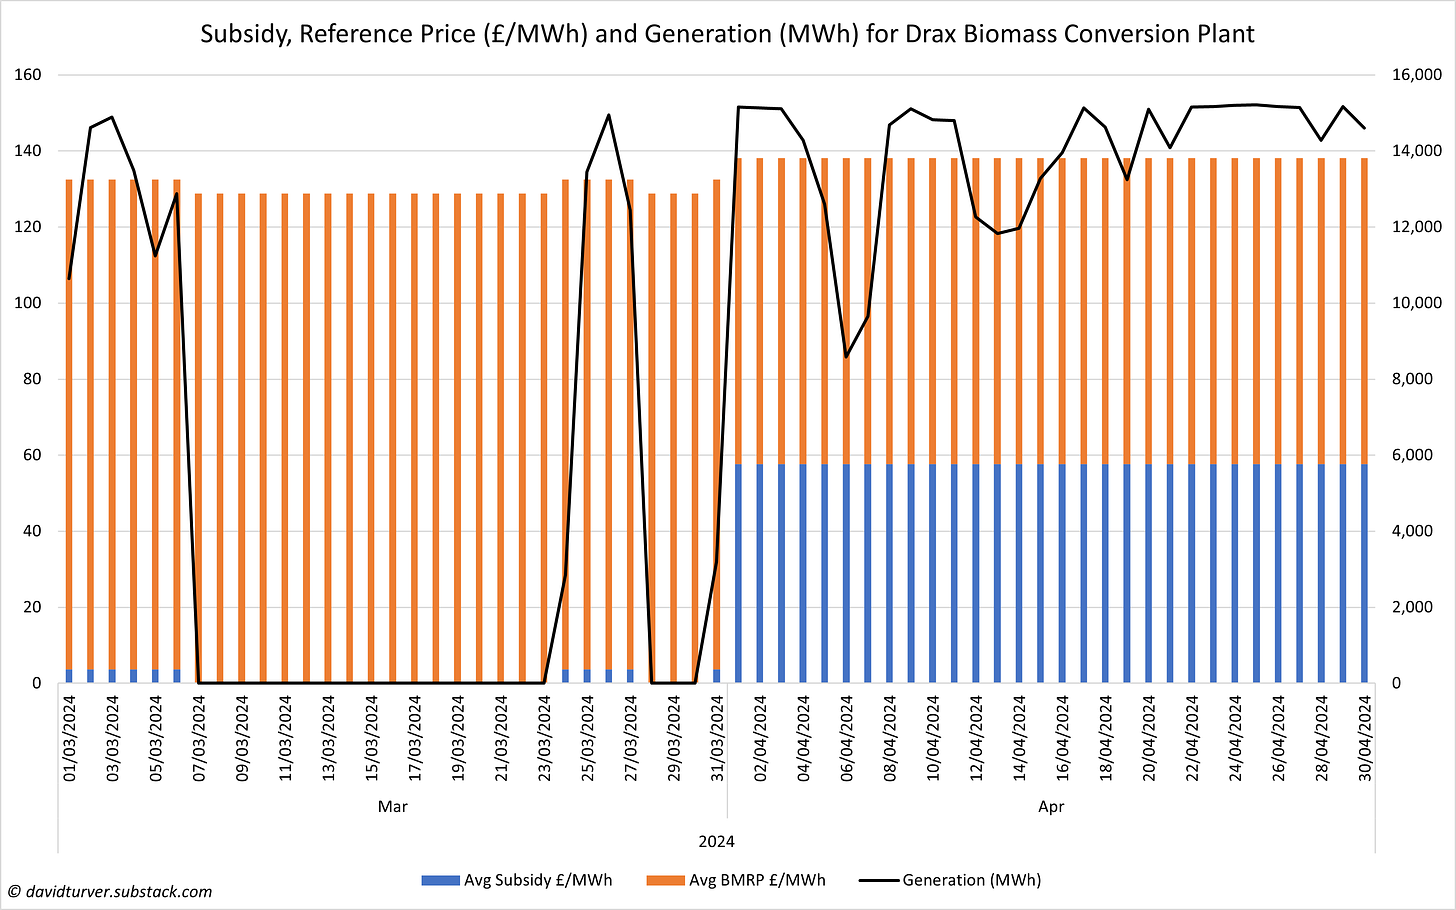 Figure 5 - Subsidy, Reference Price (£ per MWh) and Generation (MWh) for Drax Biomass Plant